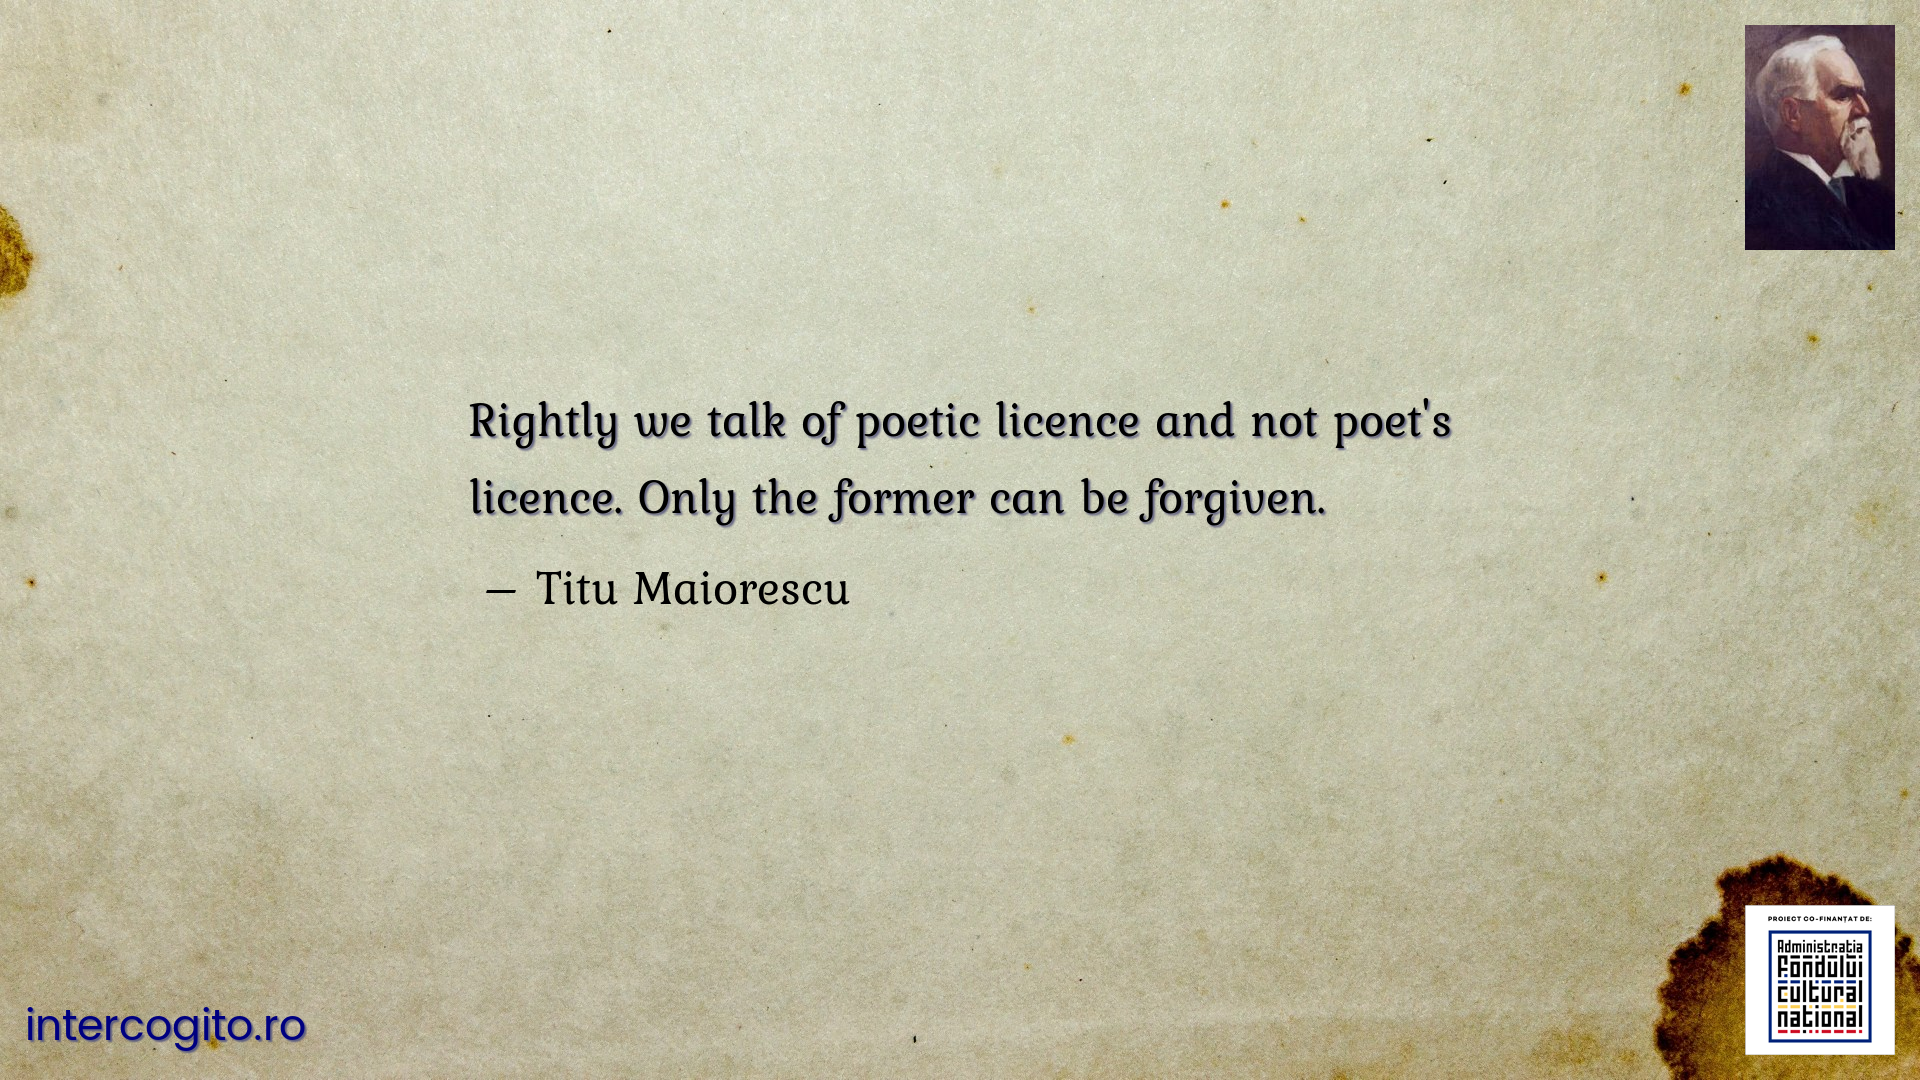 Rightly we talk of poetic licence and not poet's licence. Only the former can be forgiven.